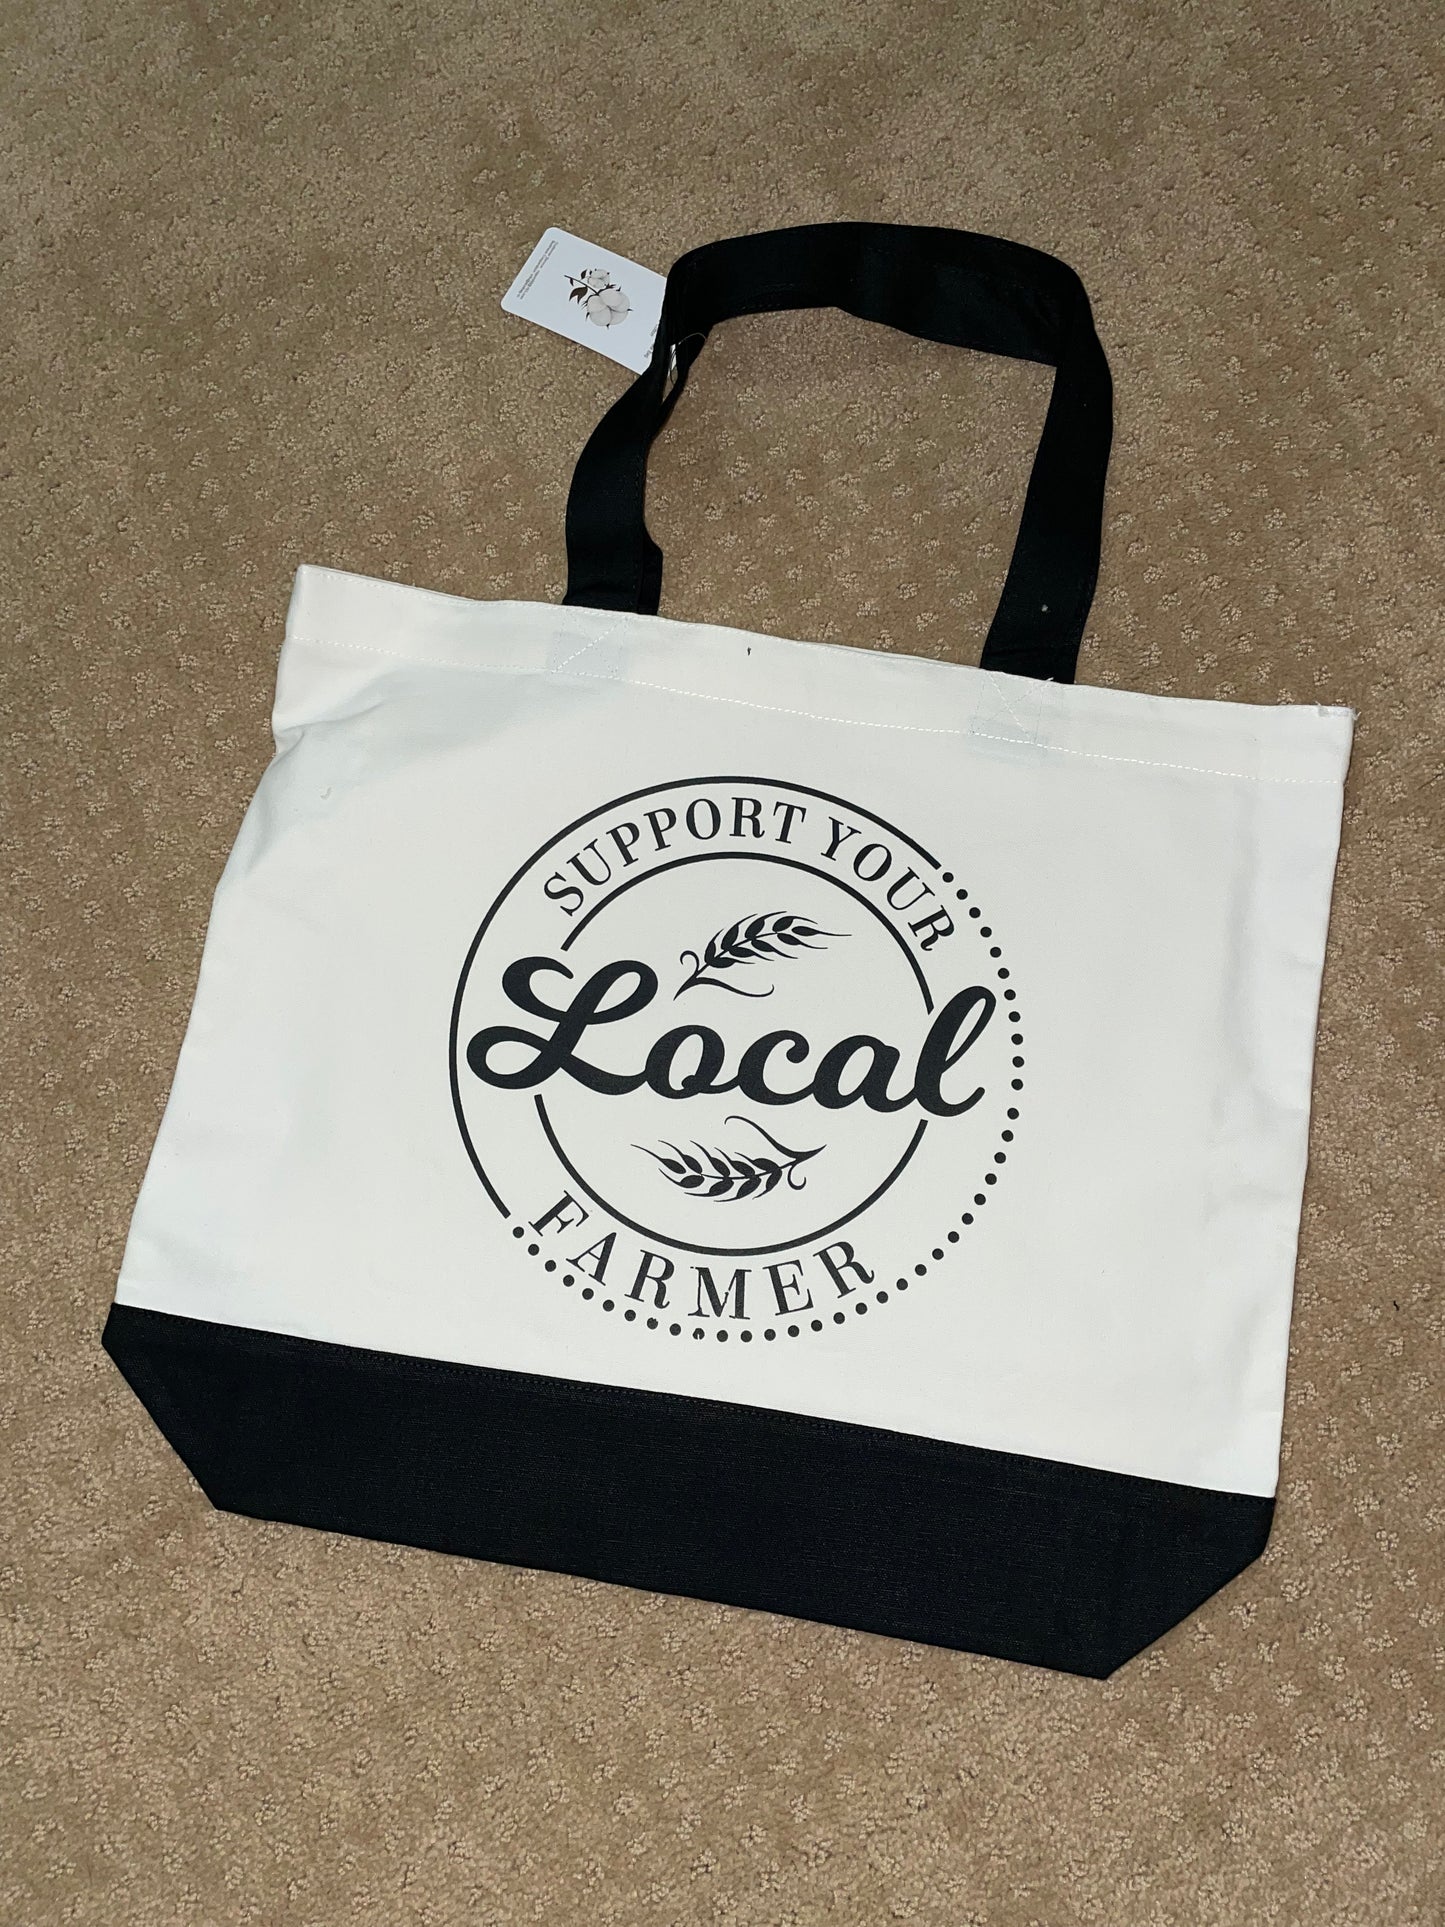 Support Your Local Farmers Bag